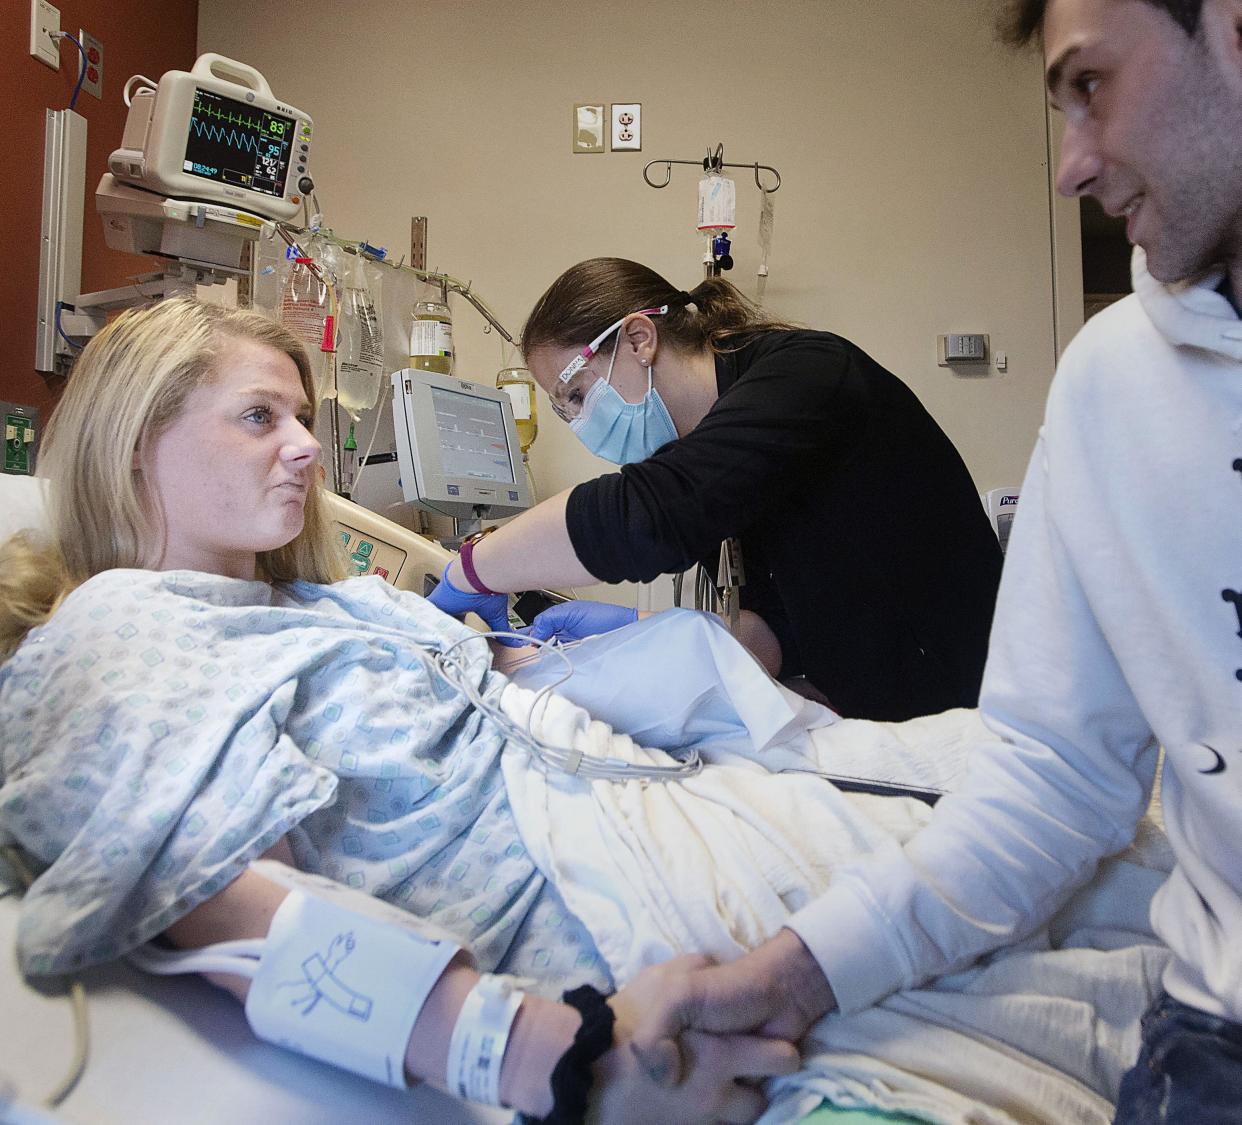 Kylie Allen-Kulyk, left, looks at Ian Pack as Donna Irish, R.N., inserts a needle into Allen-Kulyk's upper arm to begin plasma-replacement treatment in this 2021 file photo taken at UPMC Hamot. Allen-Kulyk is currently in remission and works part time as a phlebotomist.